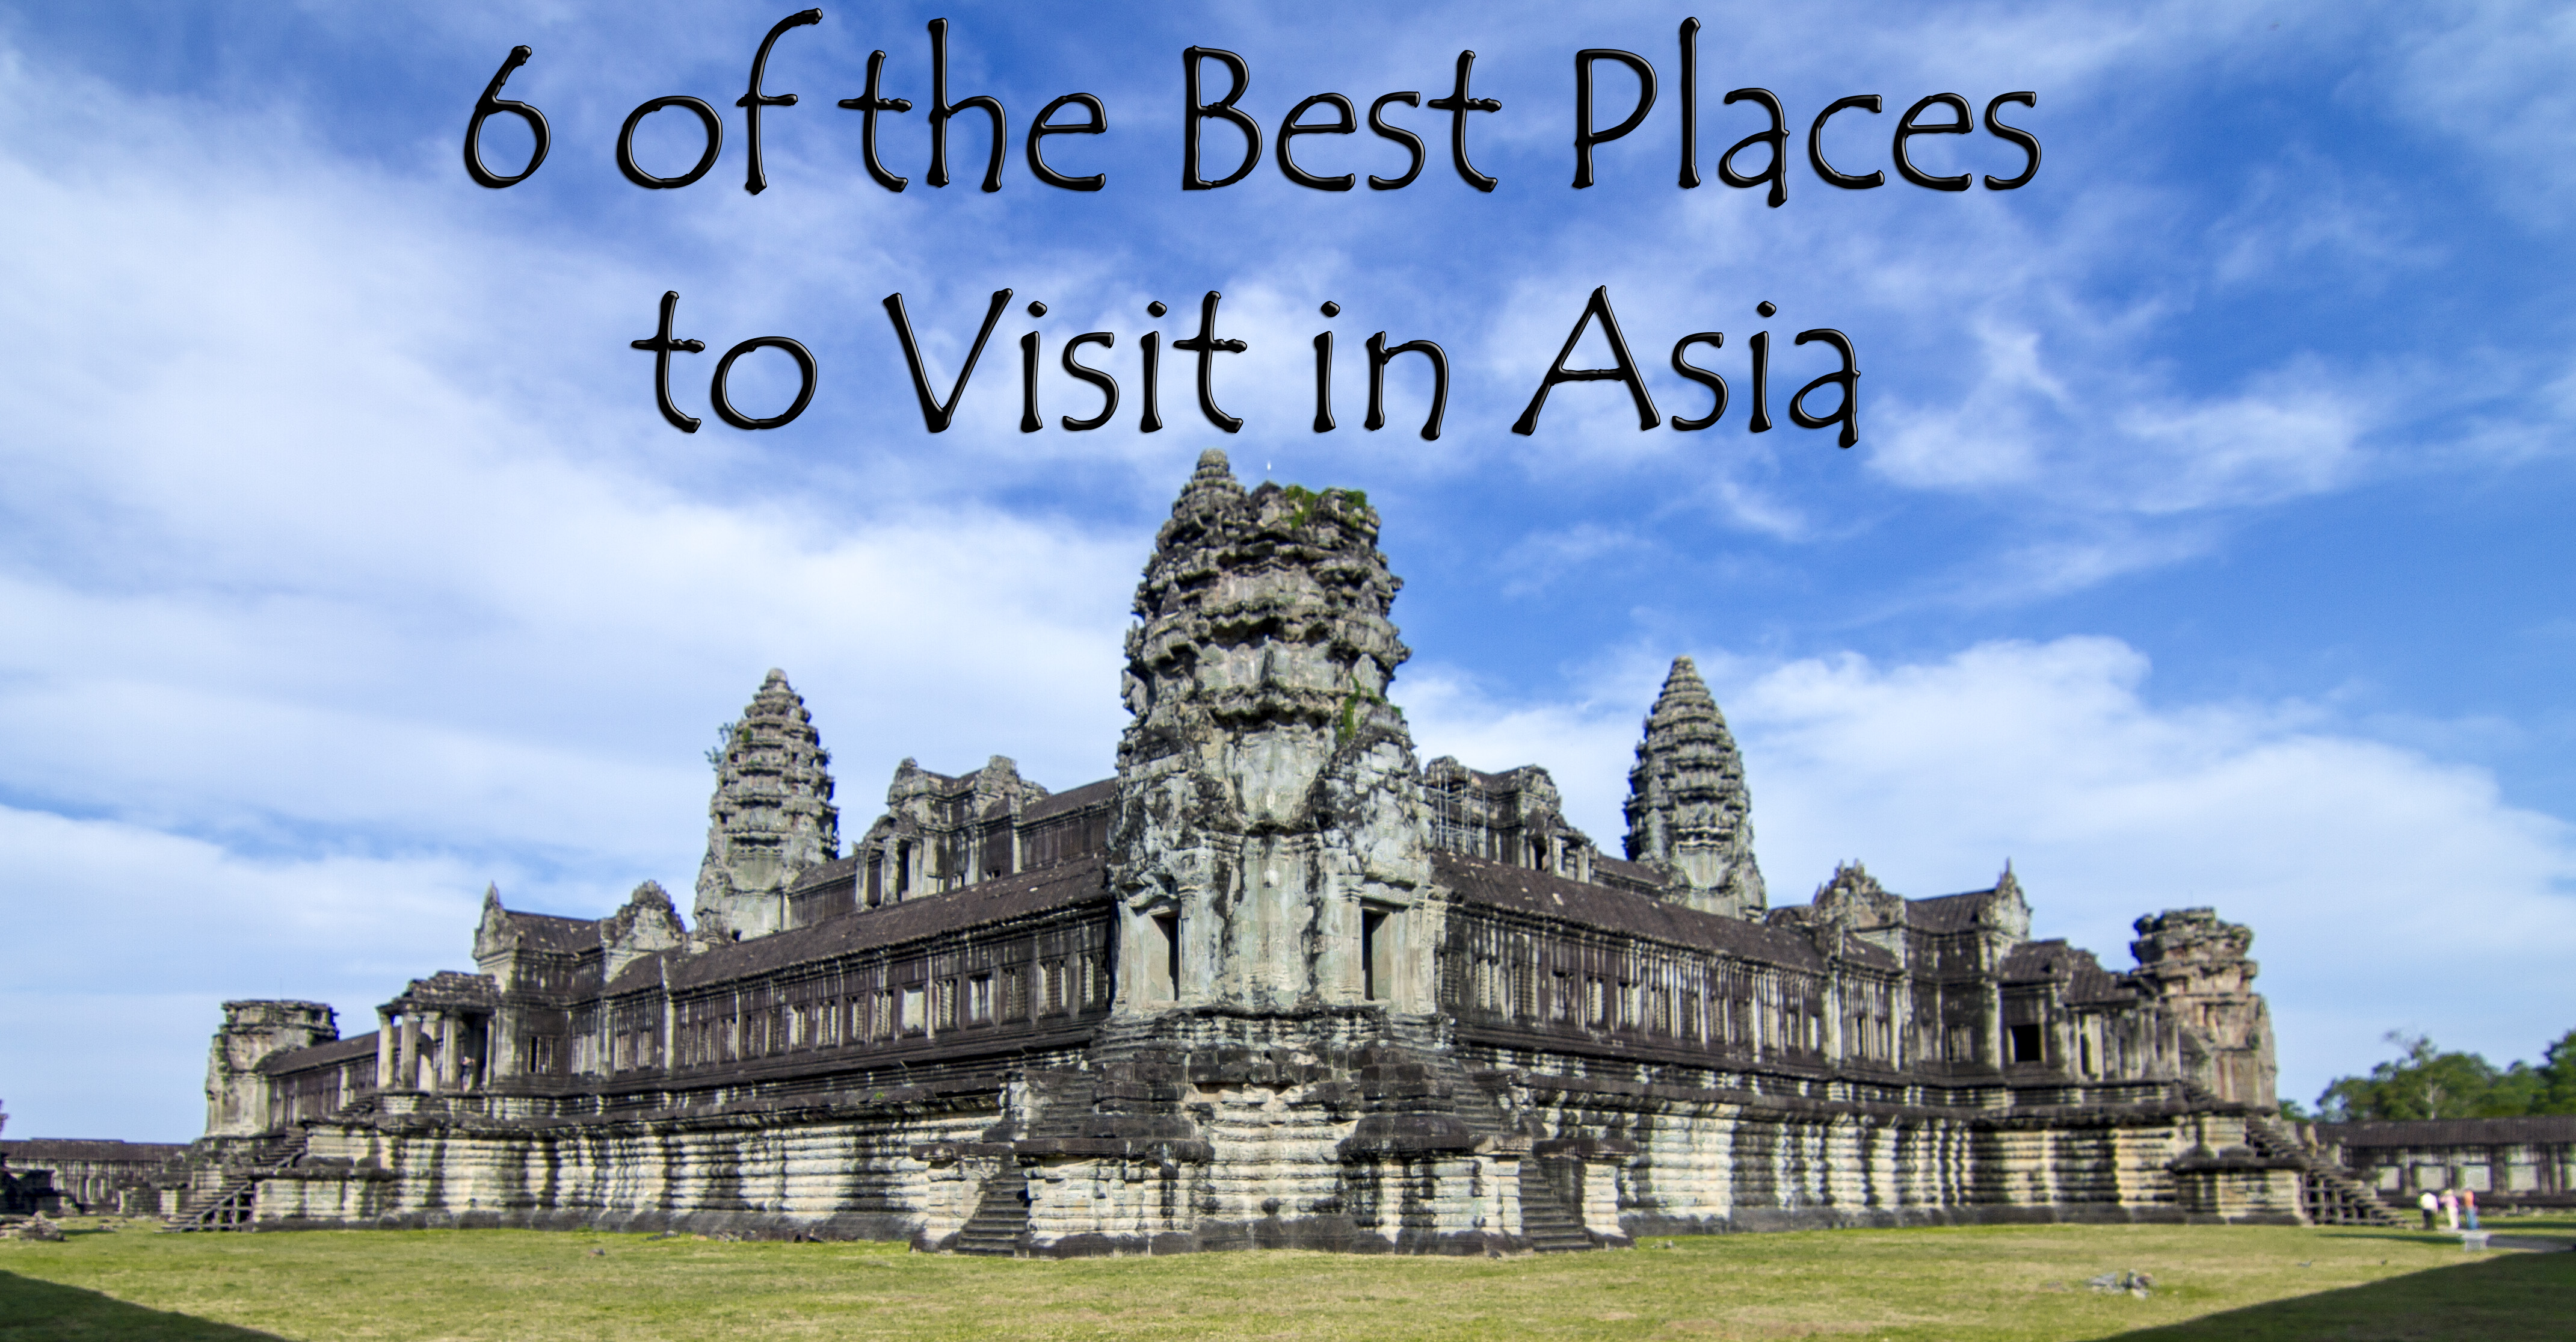 6 of the Best Places to Visit in Asia